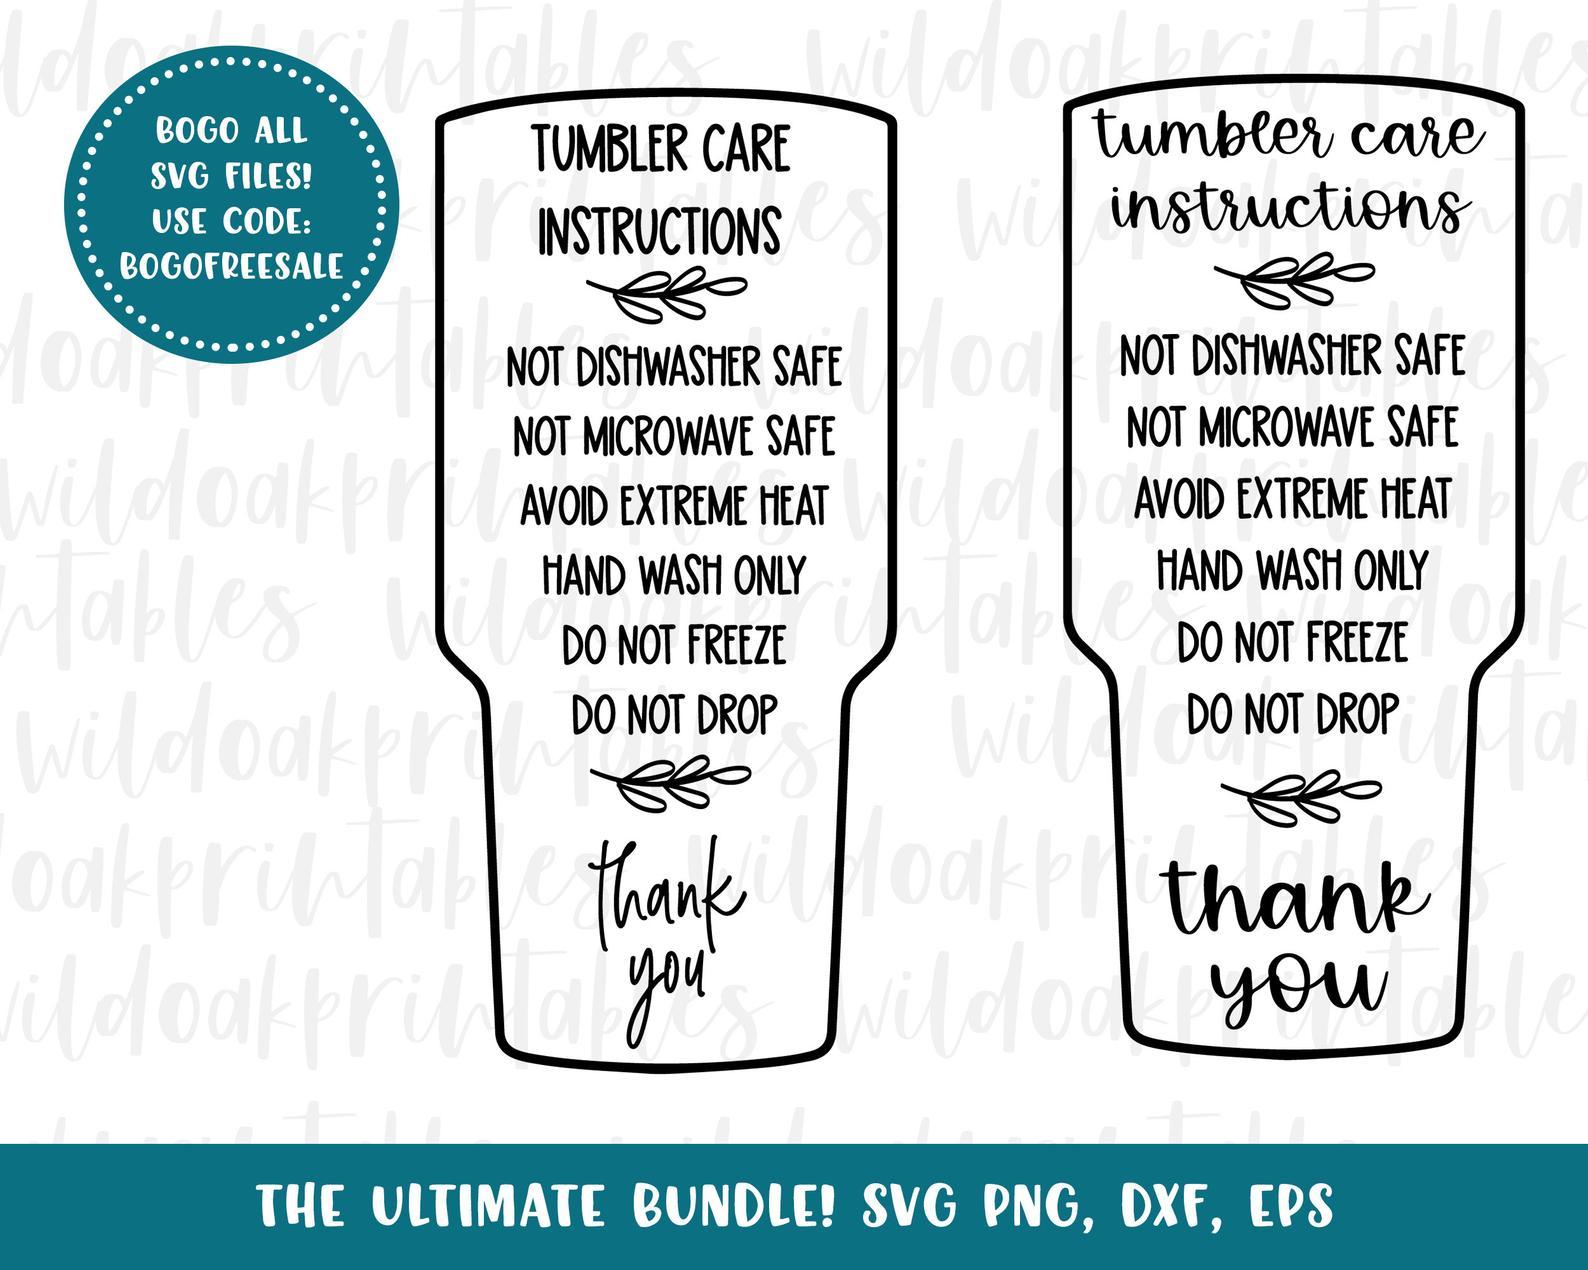 Download Tumber Care Card Svg Tumbler Care Card For Instructions Svg Tumbler Cricut Files Tumbler Files For Cricut Printable Tumbler Silhouette So Fontsy